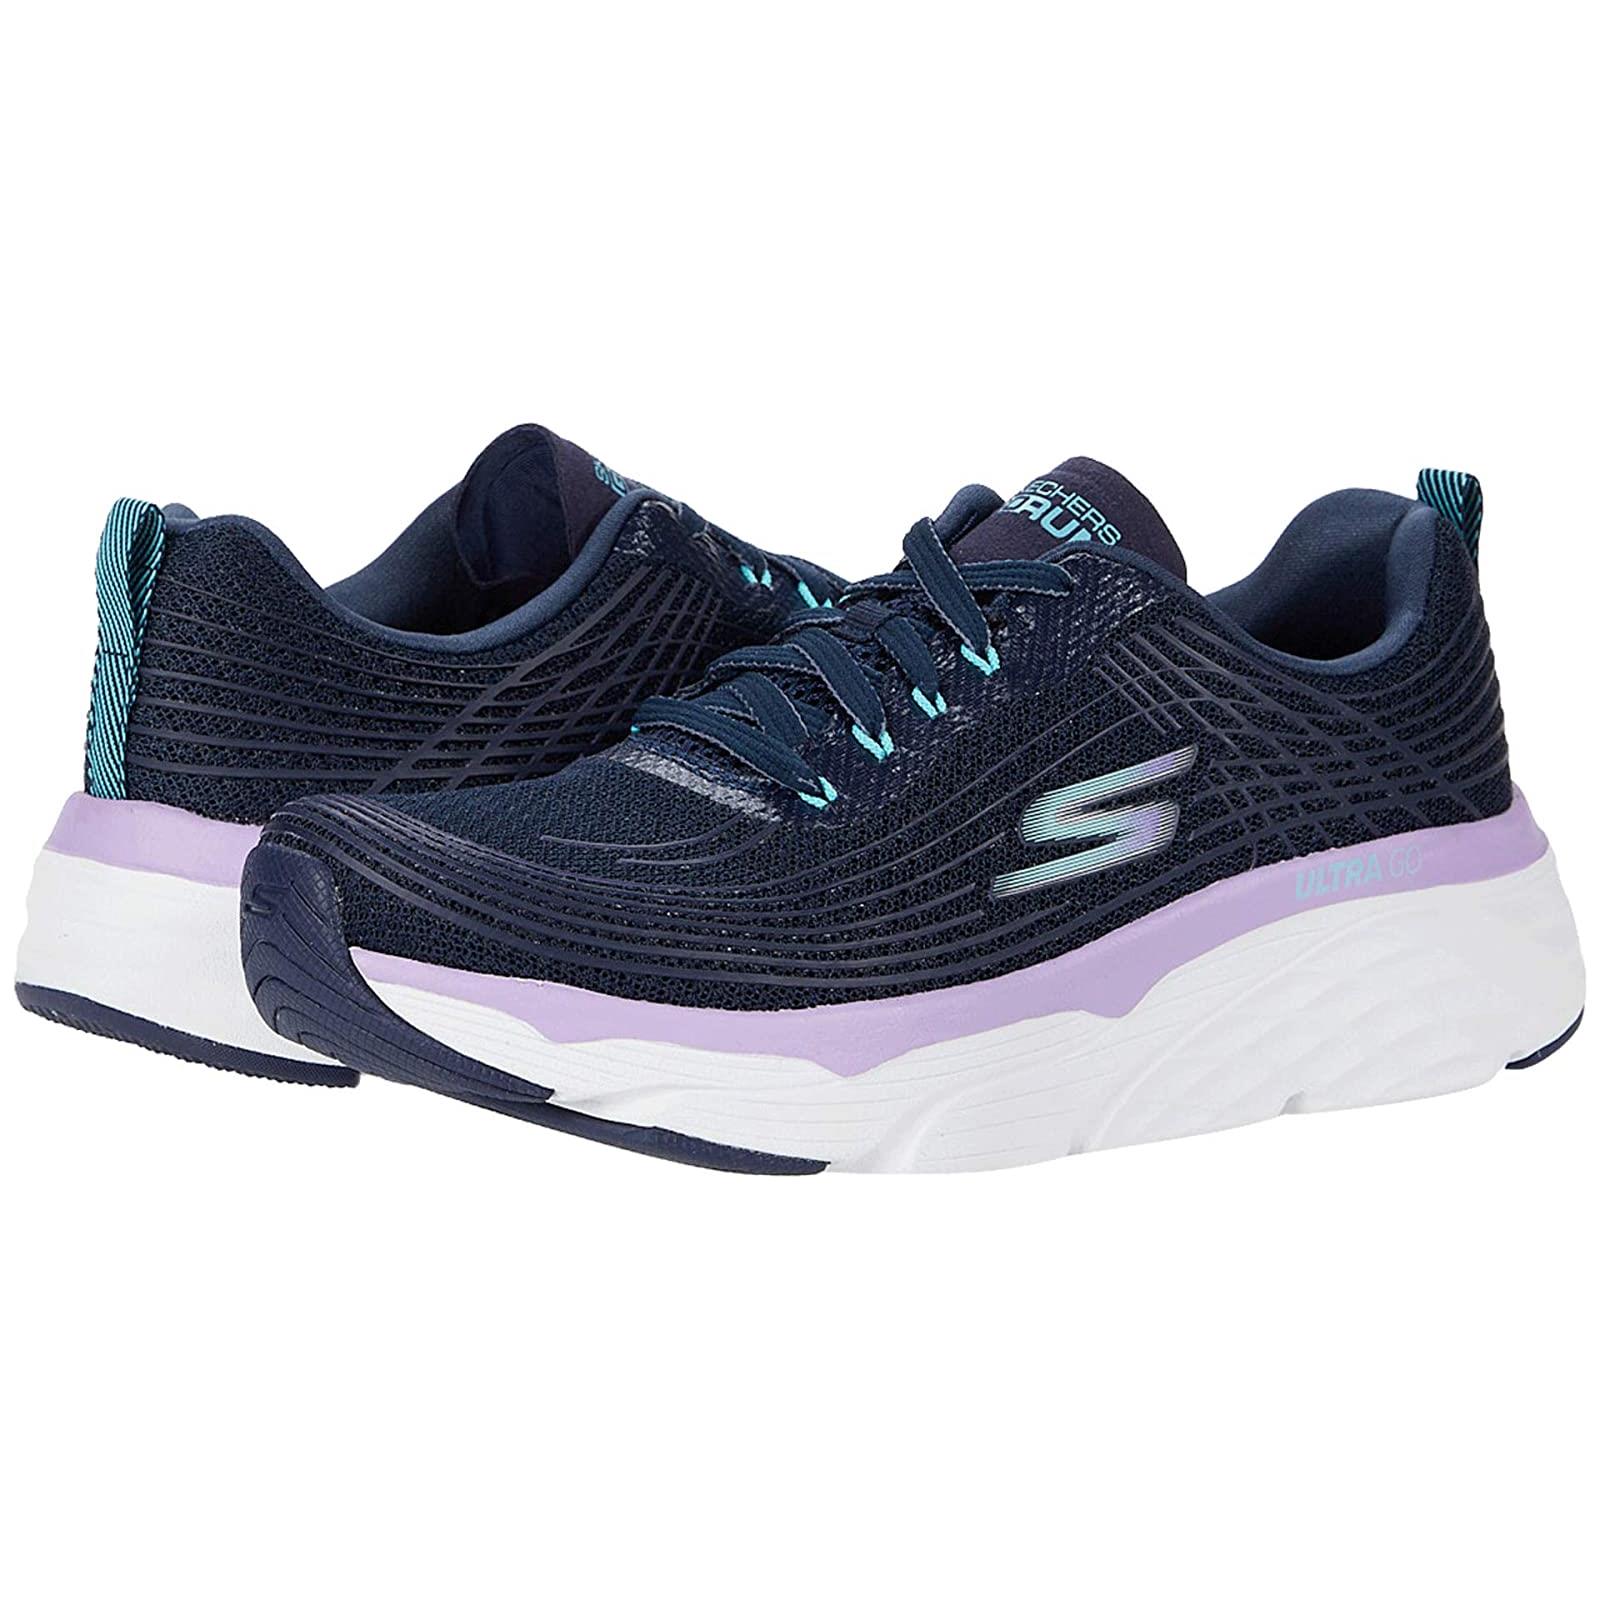 Woman`s Sneakers Athletic Shoes Skechers Max Cushion - 17693 Navy/Lavender